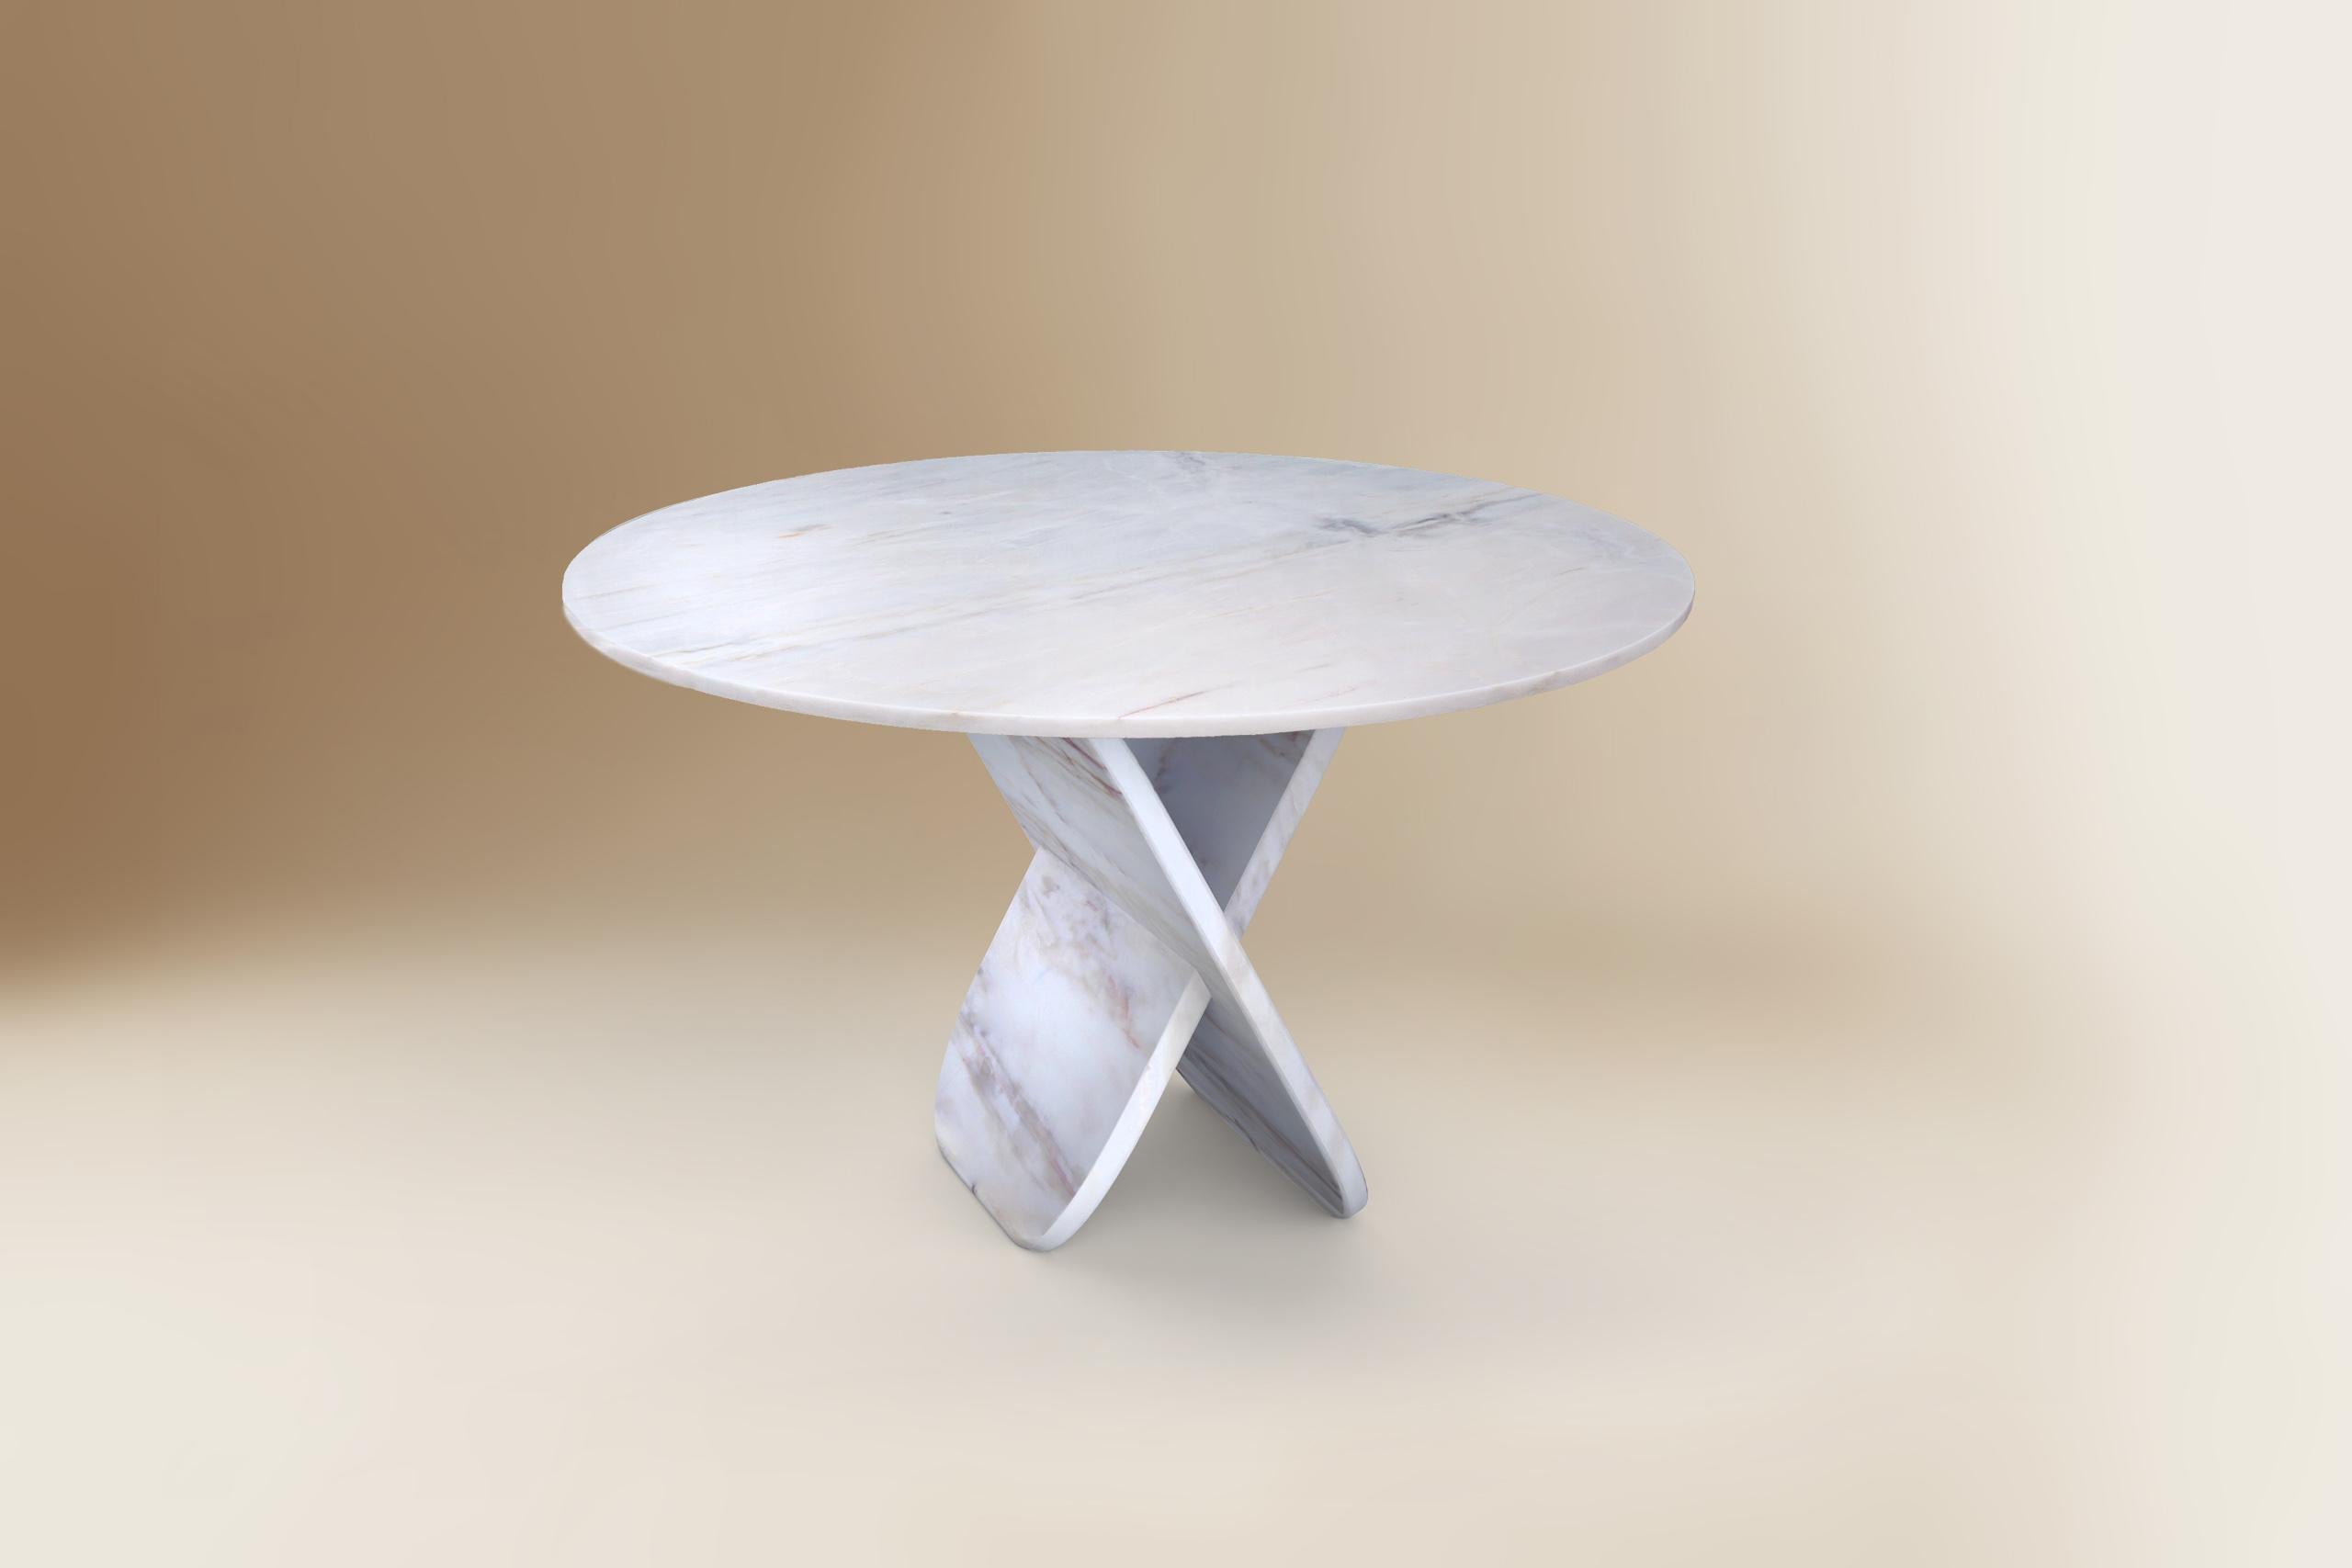 Hand-Crafted Balance Contemporary Marble Dining Round Table by Dovain Studio & Sergio Prieto For Sale